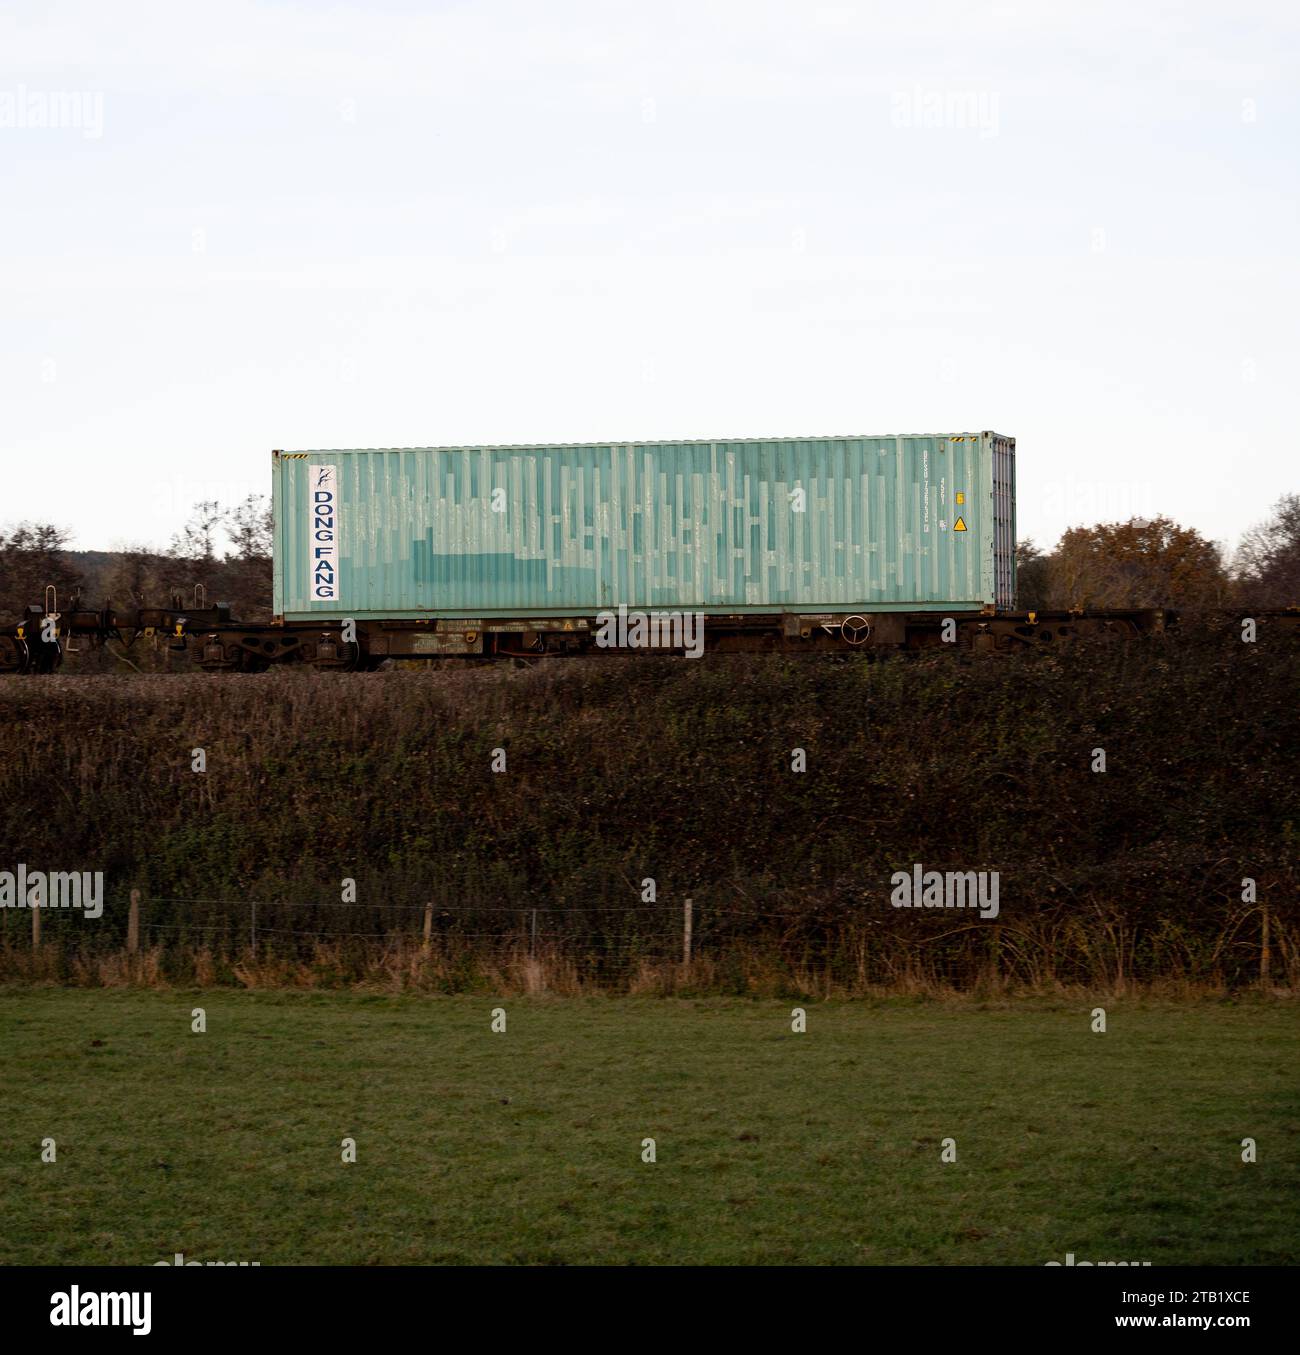 Dong Fang shipping container on a freightliner train, Warwickshire, UK Stock Photo